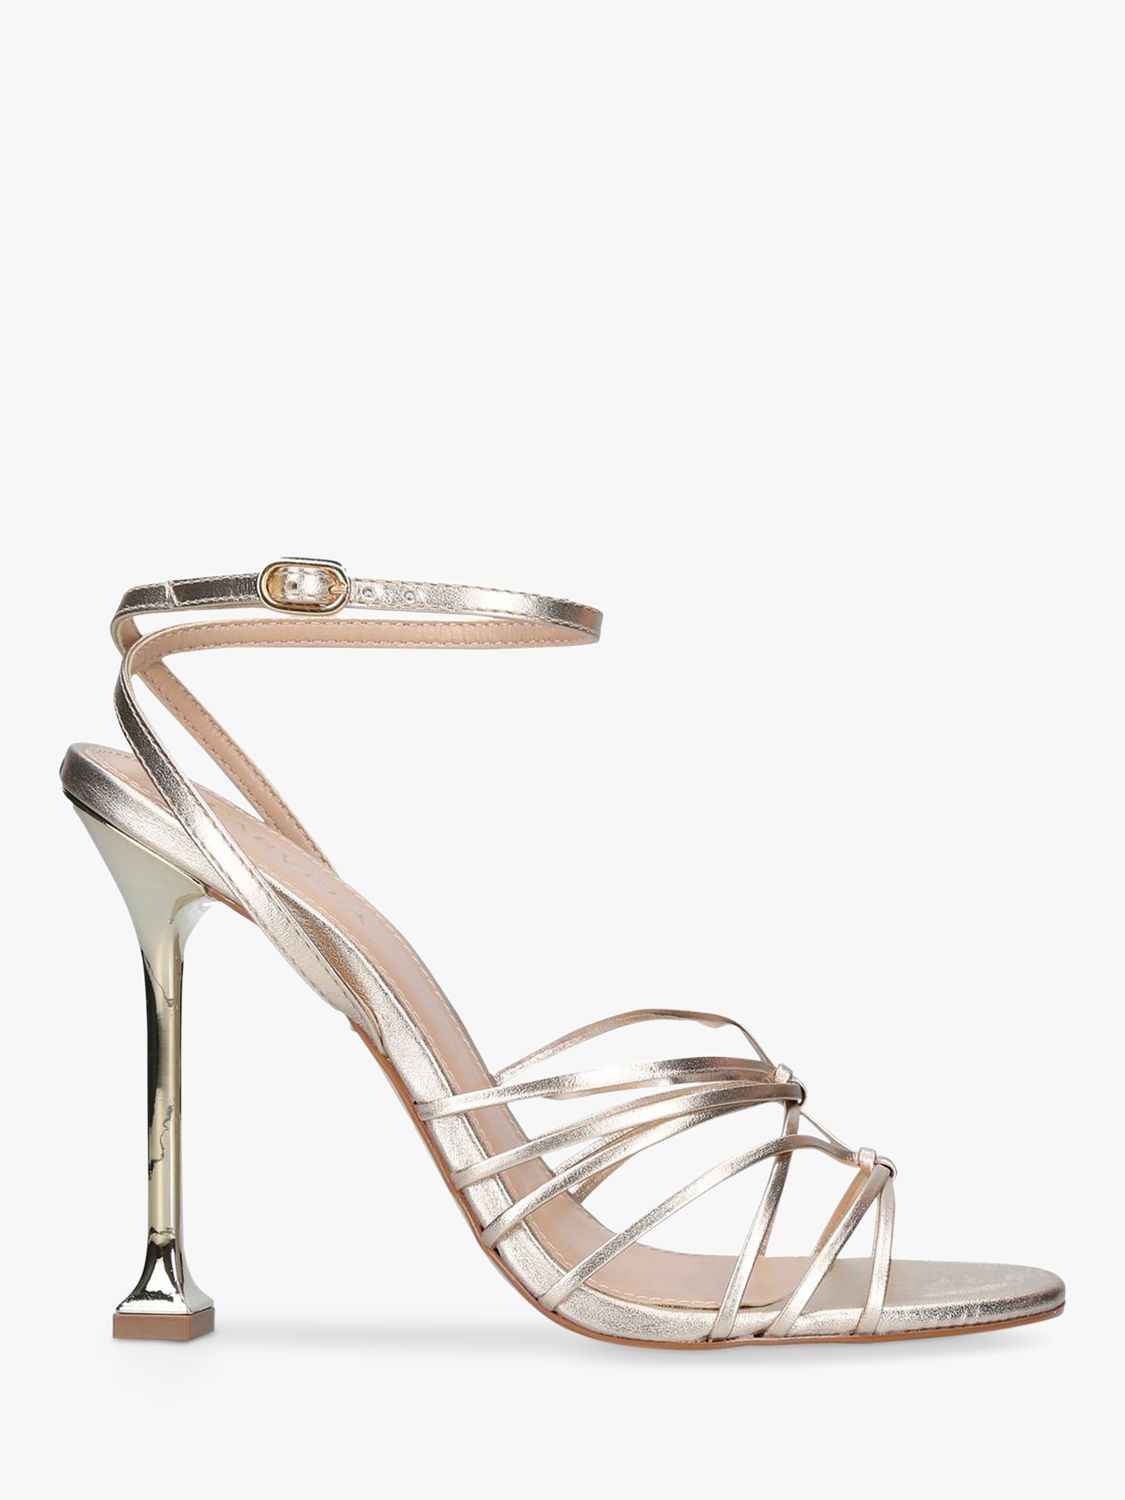 Carvela Glowing Leather Fluted Heel Strappy Sandals, Gold at John Lewis ...